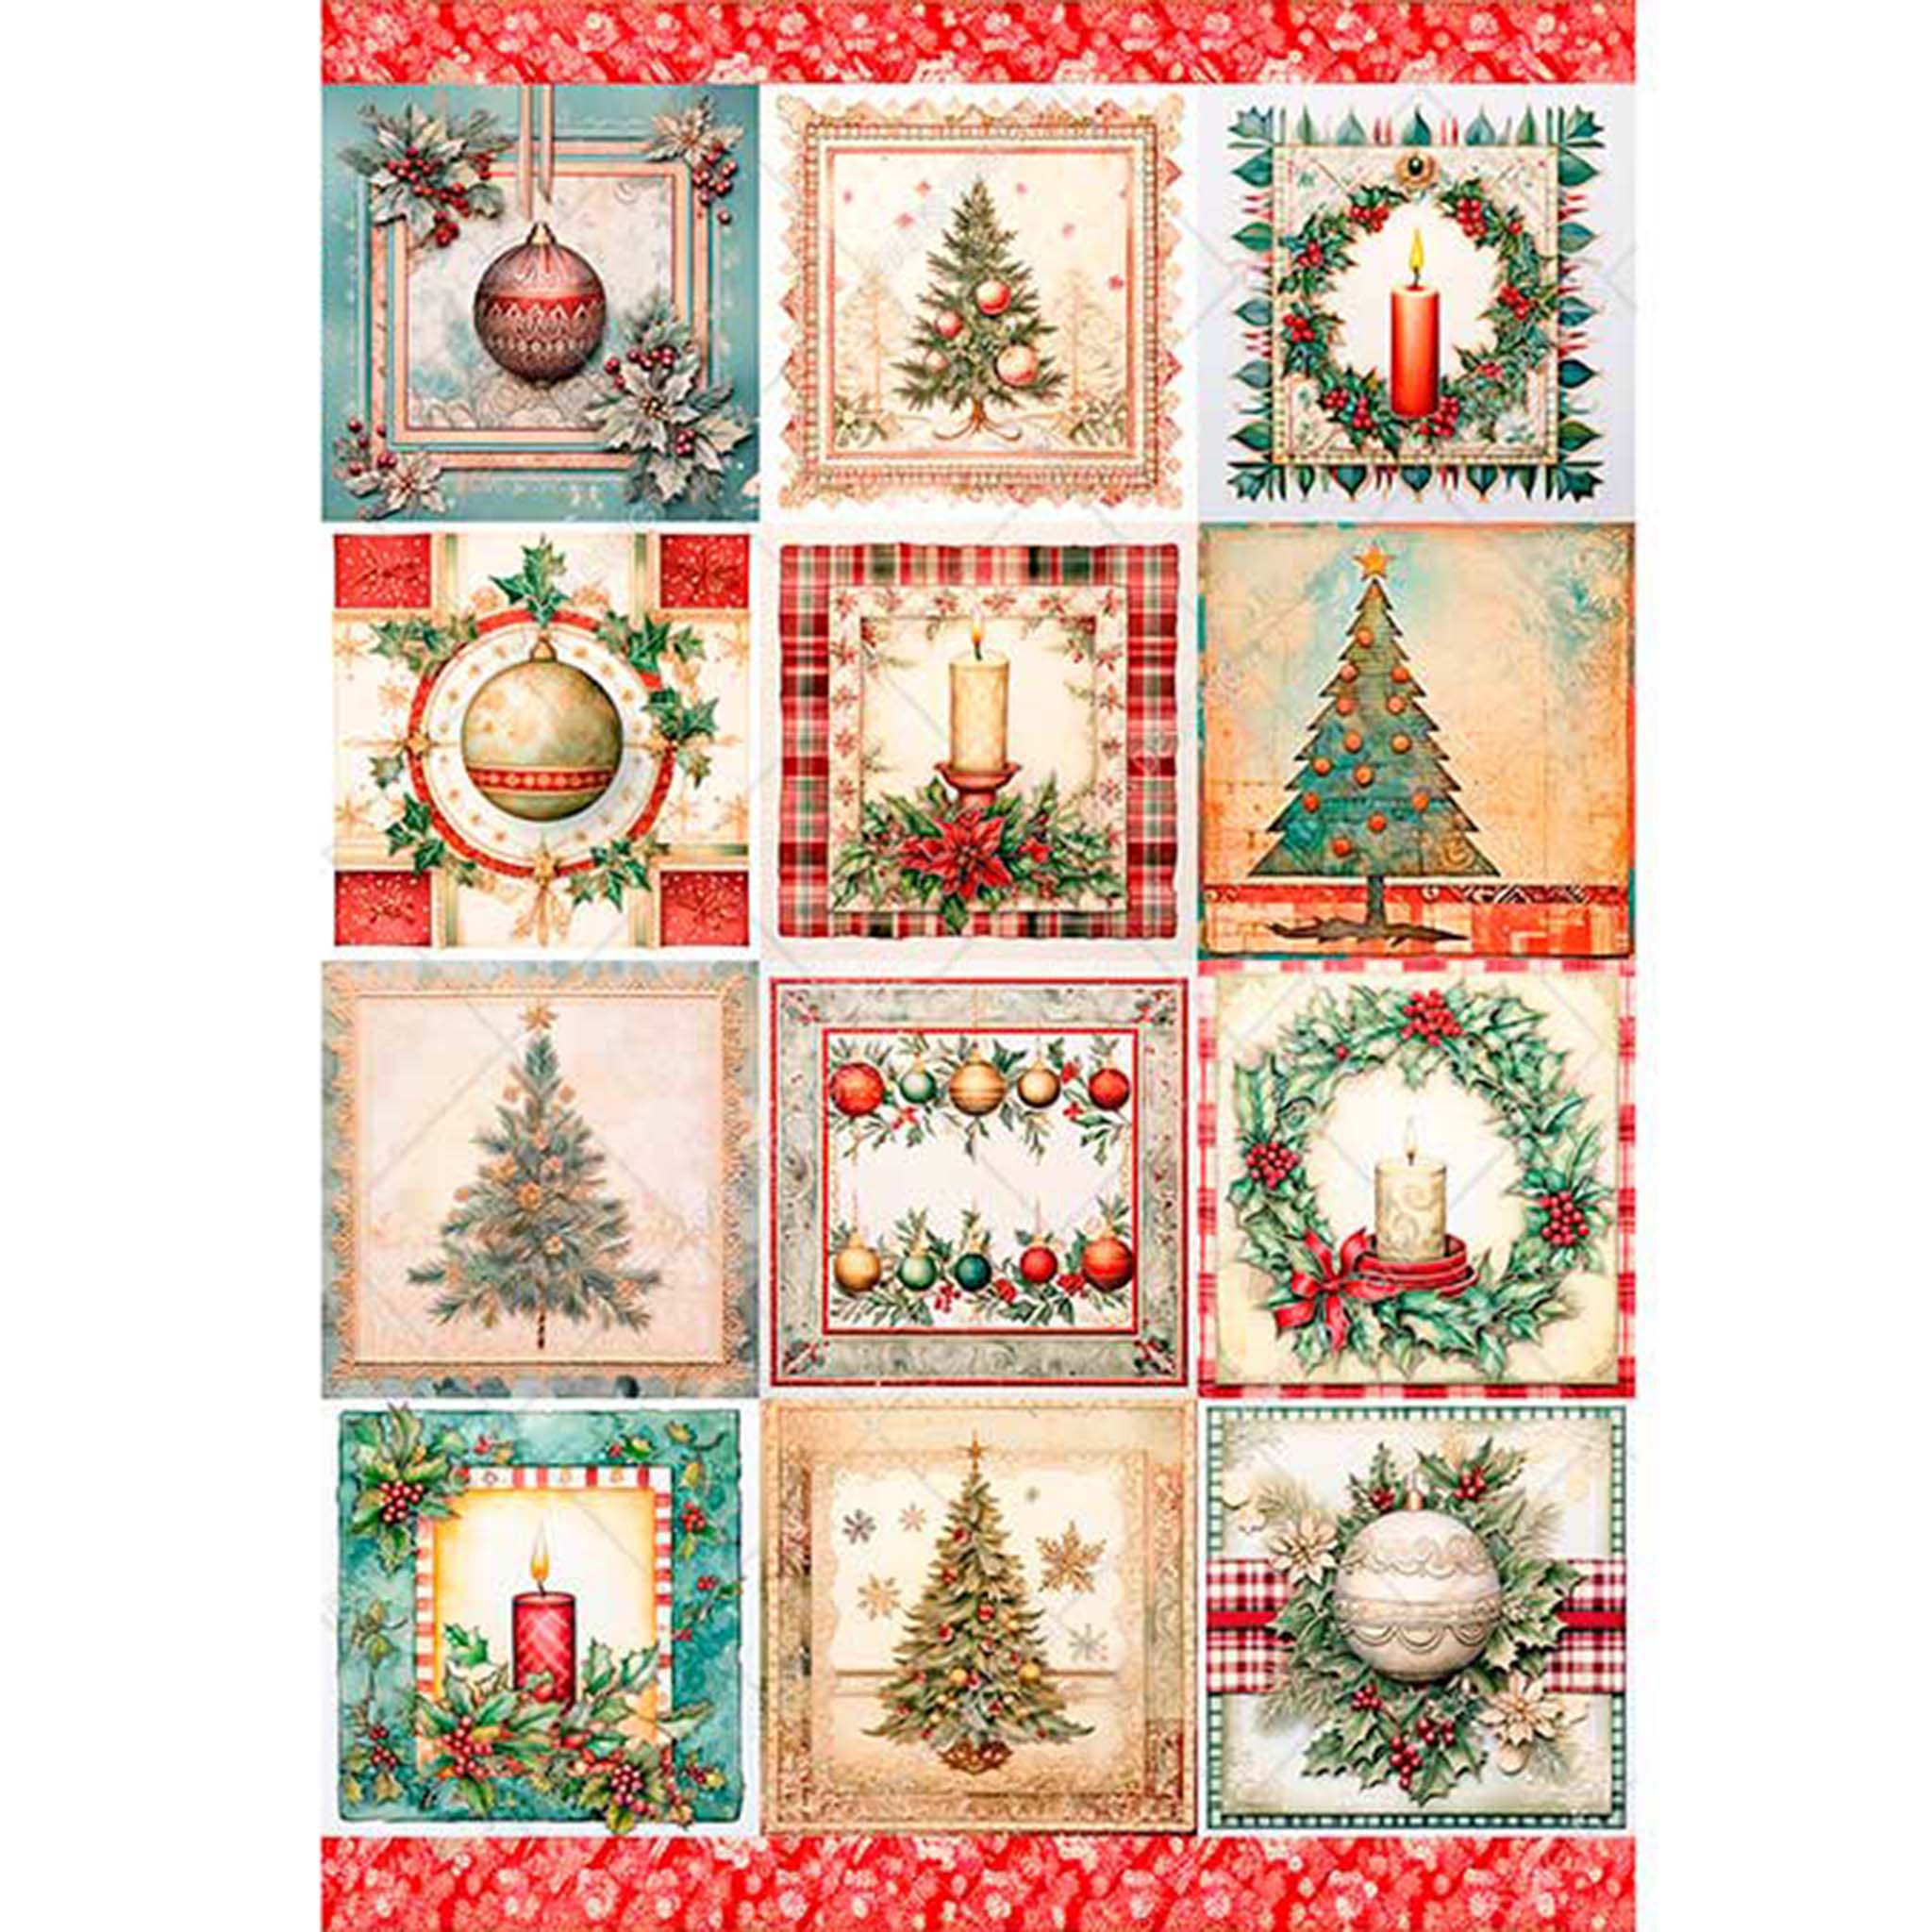 A3 rice paper design that features 12 unique miniature Christmas scenes, from Christmas Trees to ornaments to wreaths. White borders are on the sides.